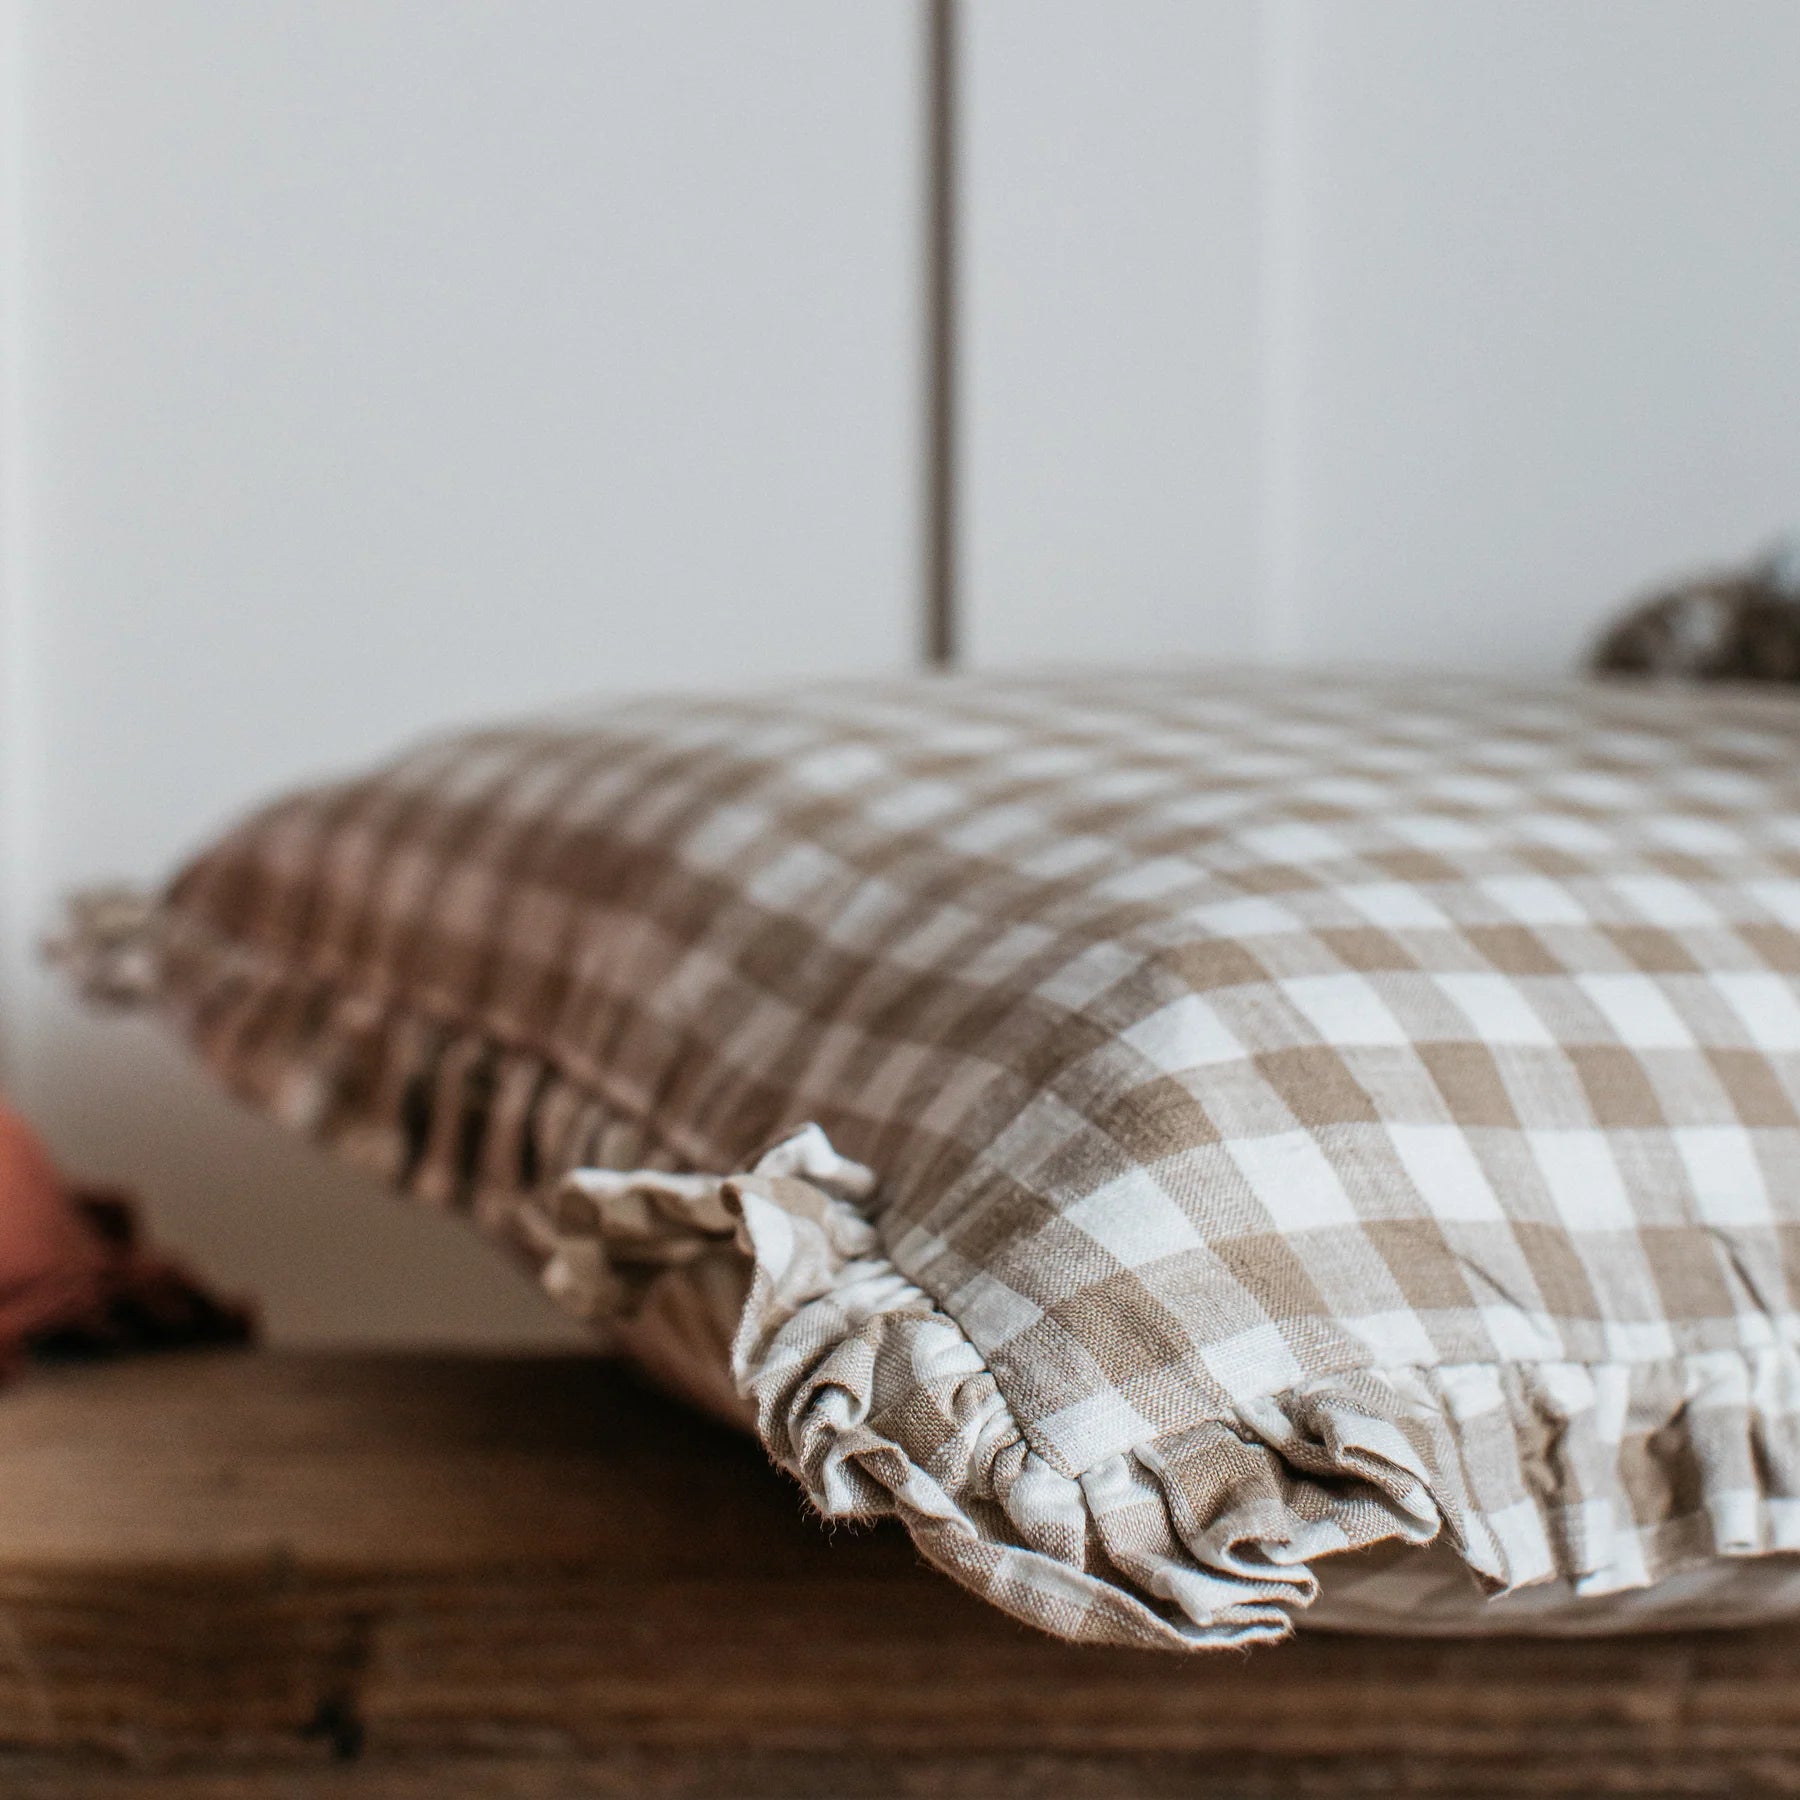 A neutral gingham ruffle cushion lays on a reclaimed style wooden bench against a cream panelled wall.